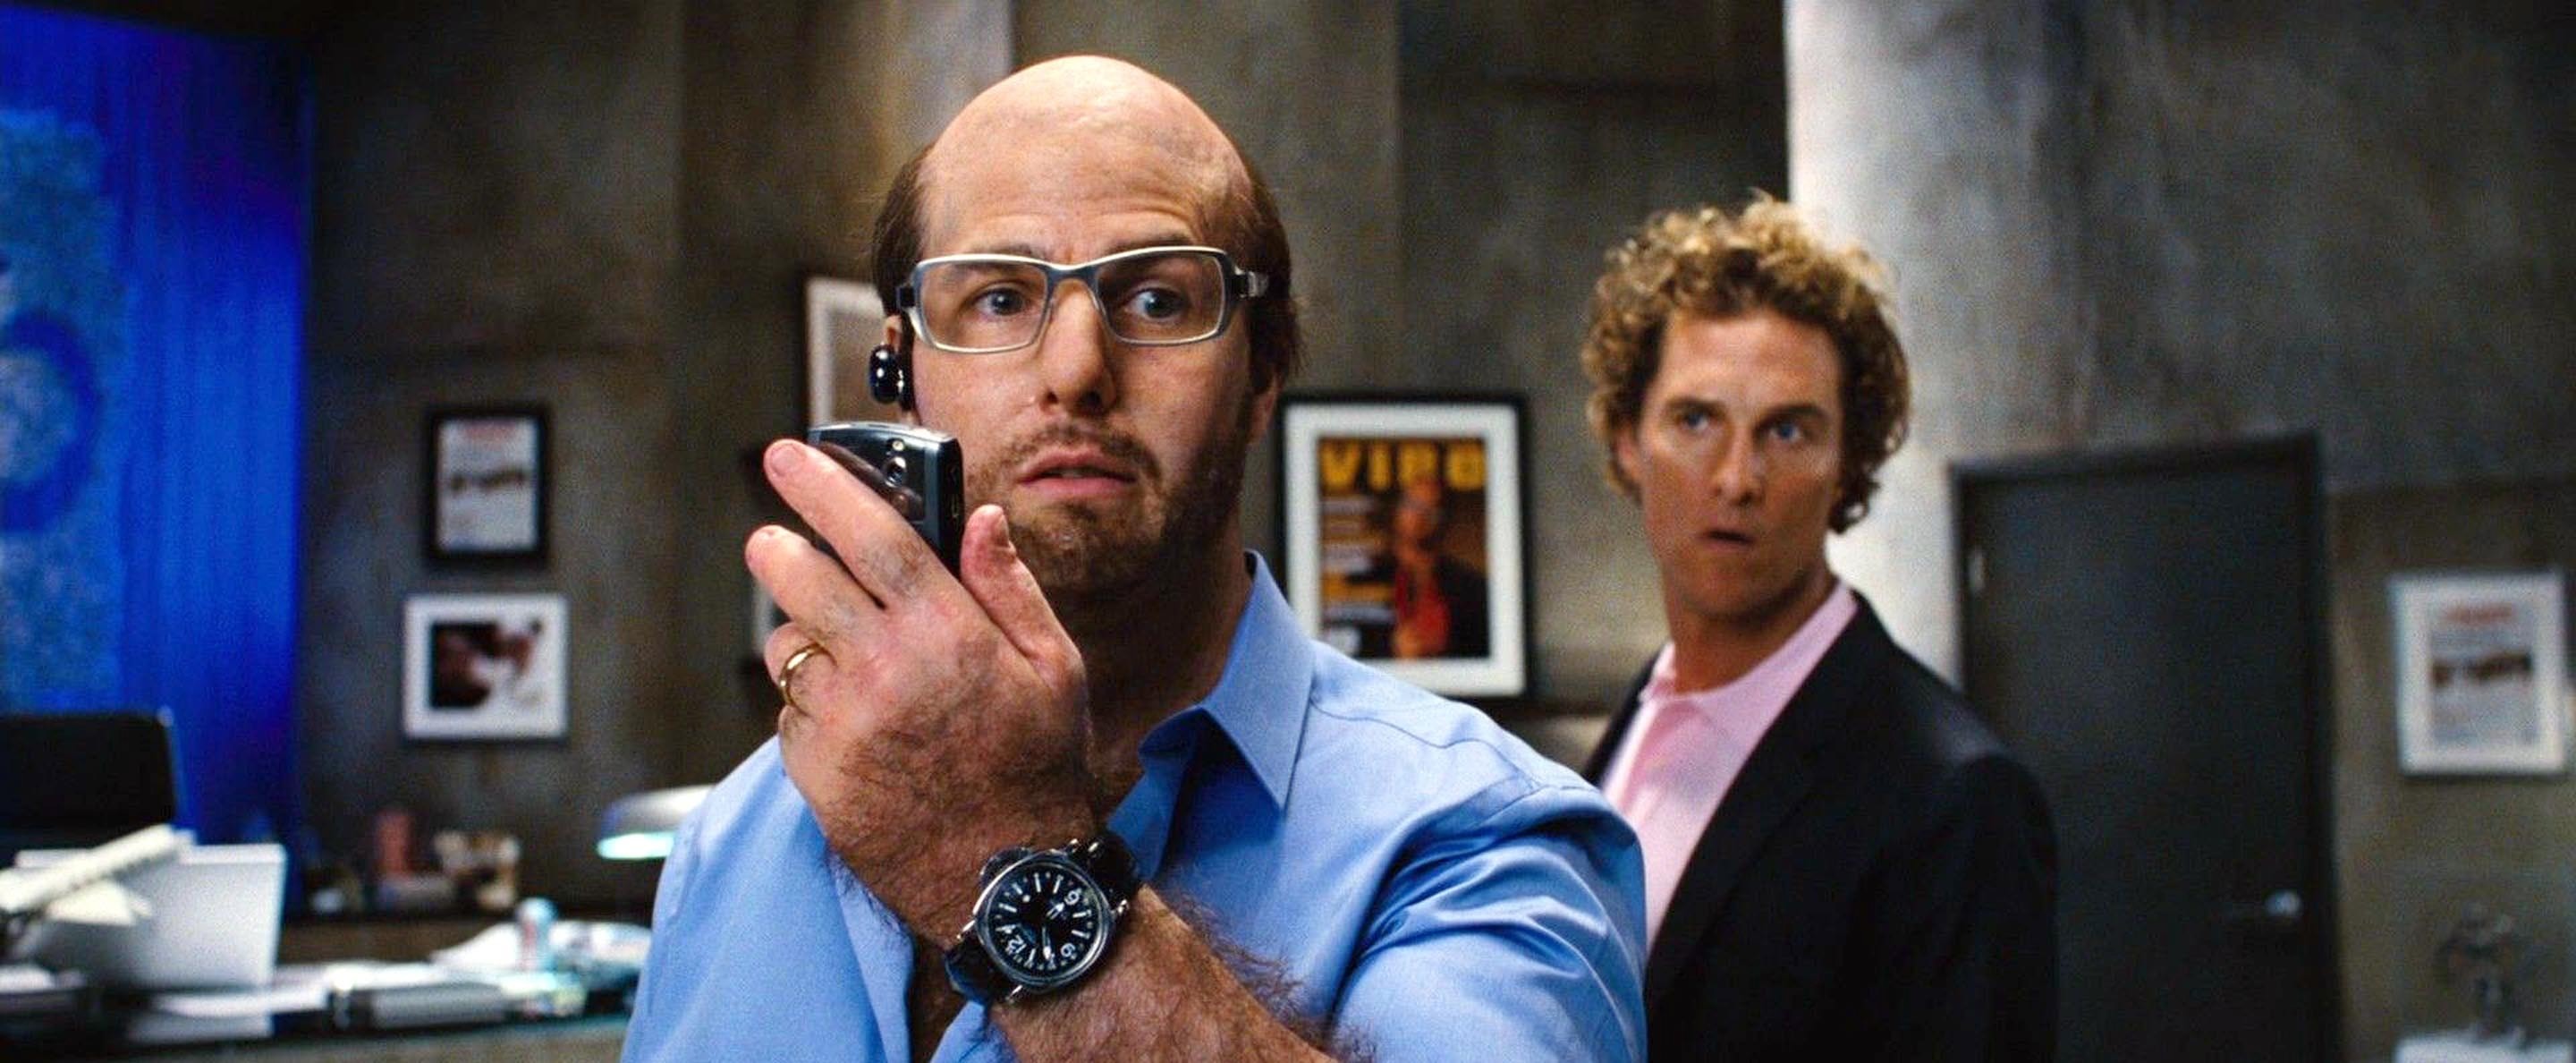 <p>Tom Cruise looked nearly unrecognizable as studio head Les Grossman in 2008's "Tropic Thunder." The A-lister earned a Golden Globe nomination for his scene-stealing performance in the comedy film, which co-starred Ben Stiller, Jack Black, Robert Downey Jr., <a href="https://www.wonderwall.com/celebrity/profiles/overview/matthew-mcconaughey-354.article">Matthew McConaughey</a> and more.</p>